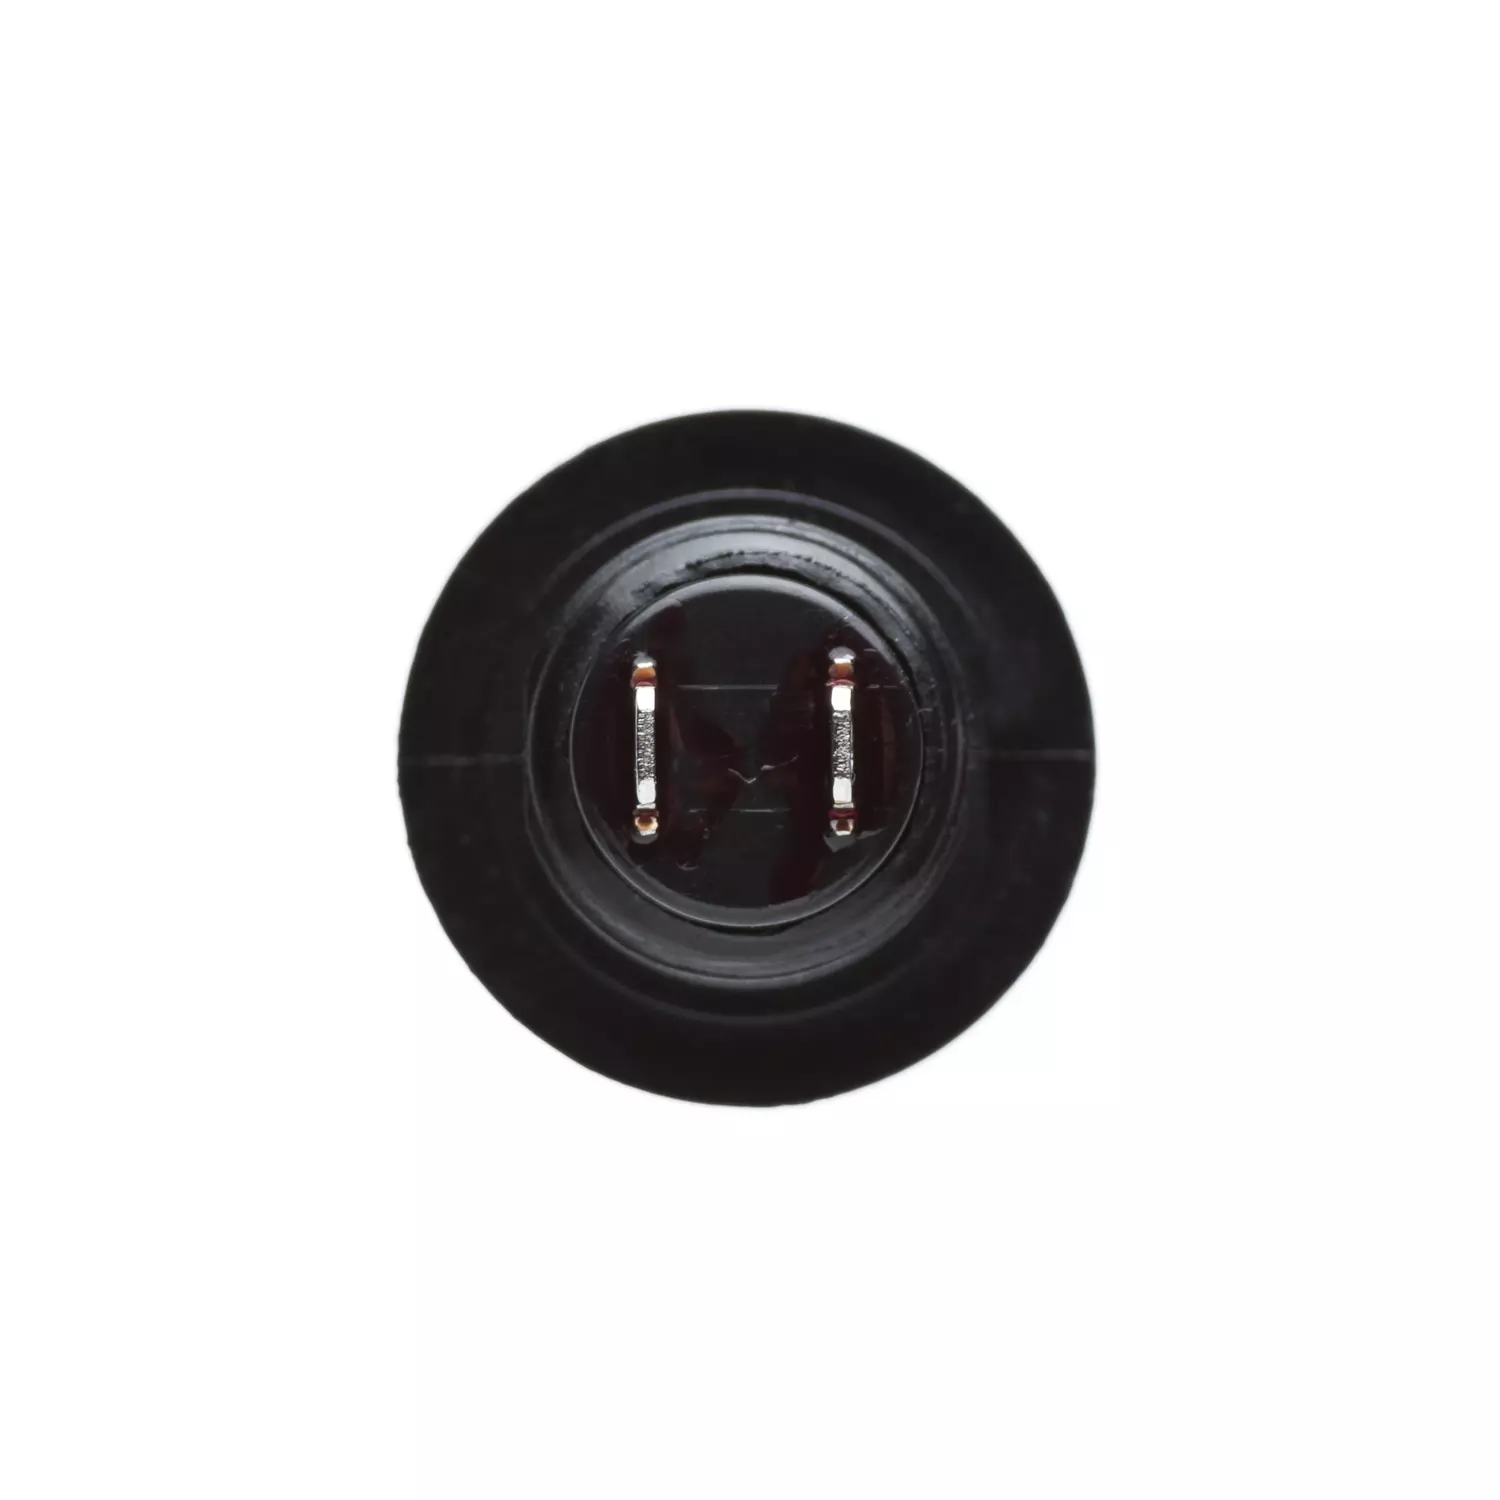 Photo of 12mm Momentary Push Button Dome - Yellow